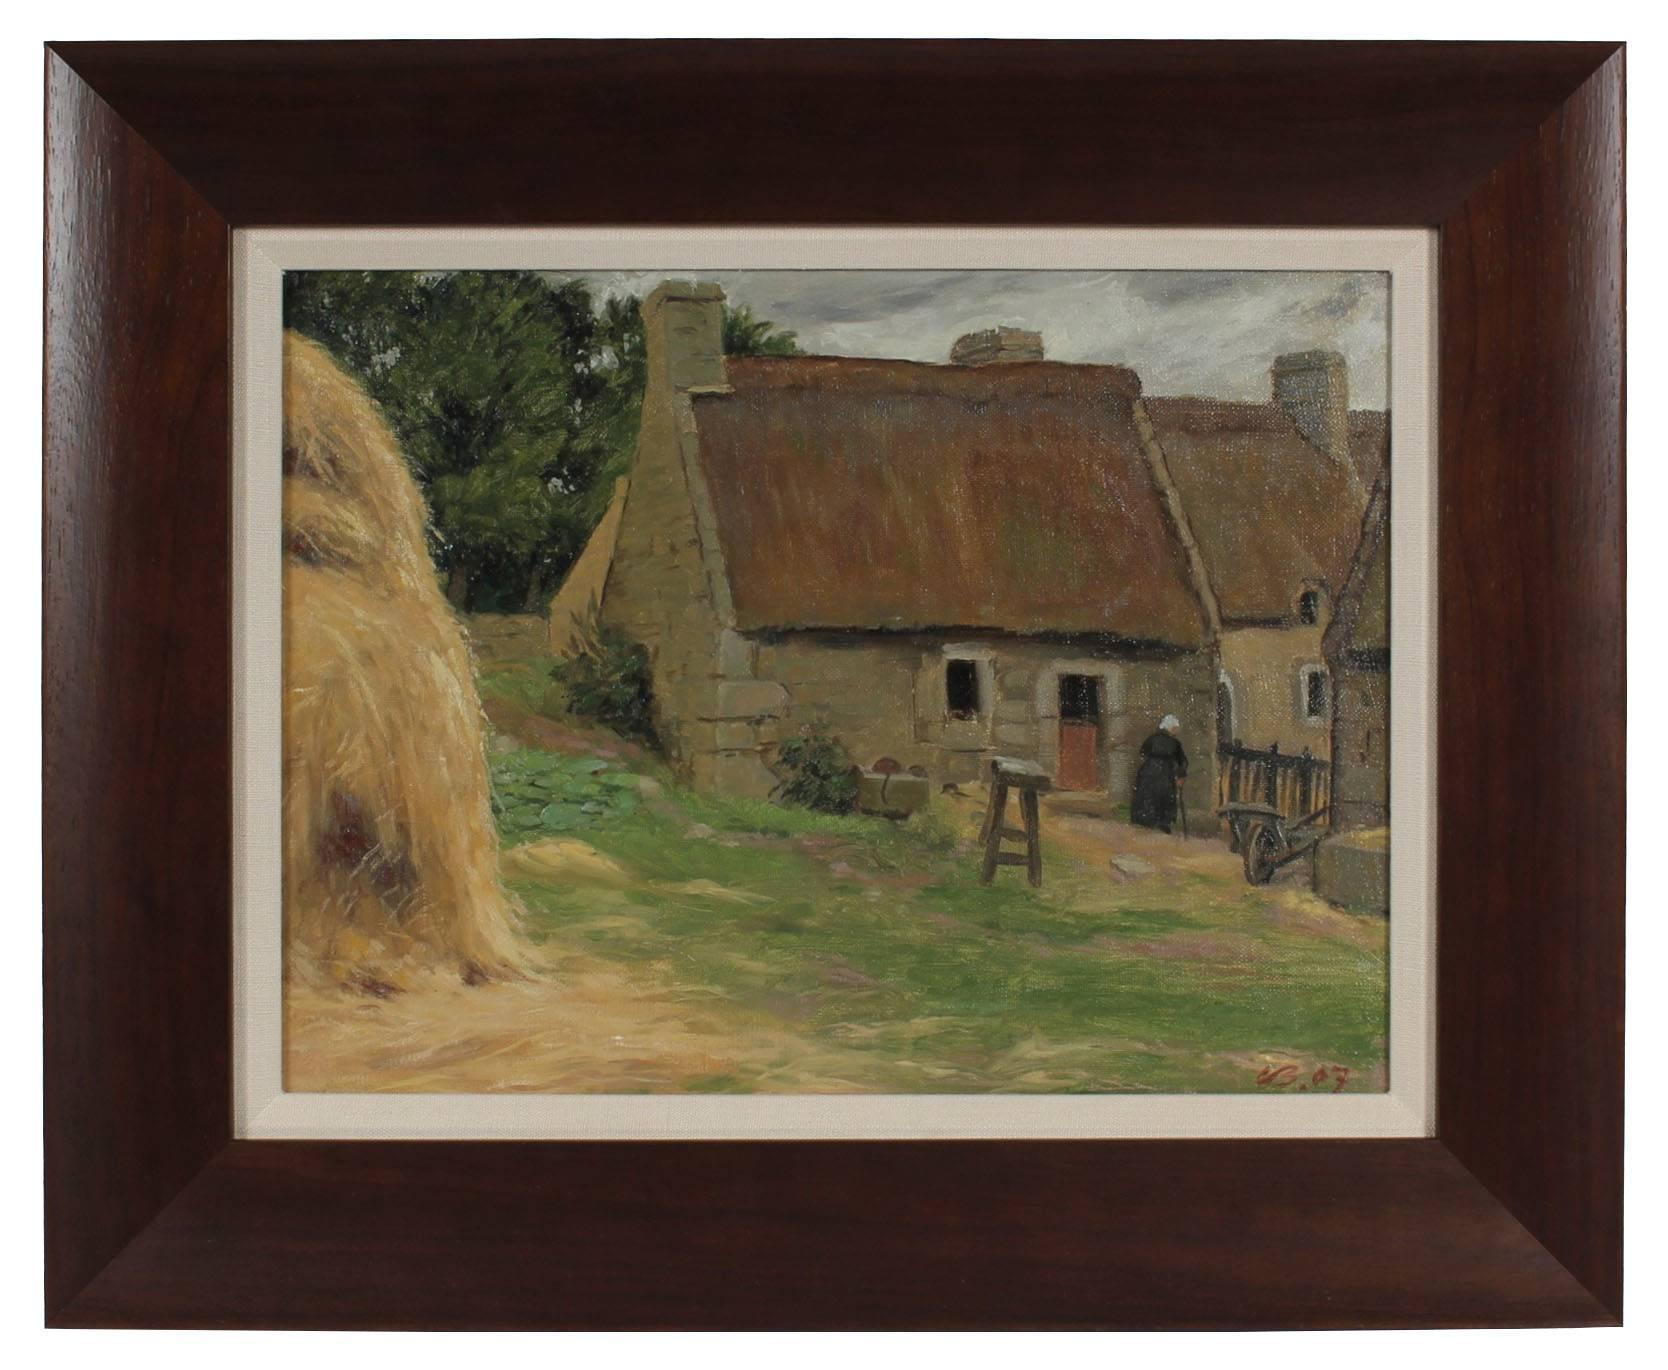 Carl Barnas Landscape Painting - "Farm in Brittany" European Countryside Landscape in Oil, 1903